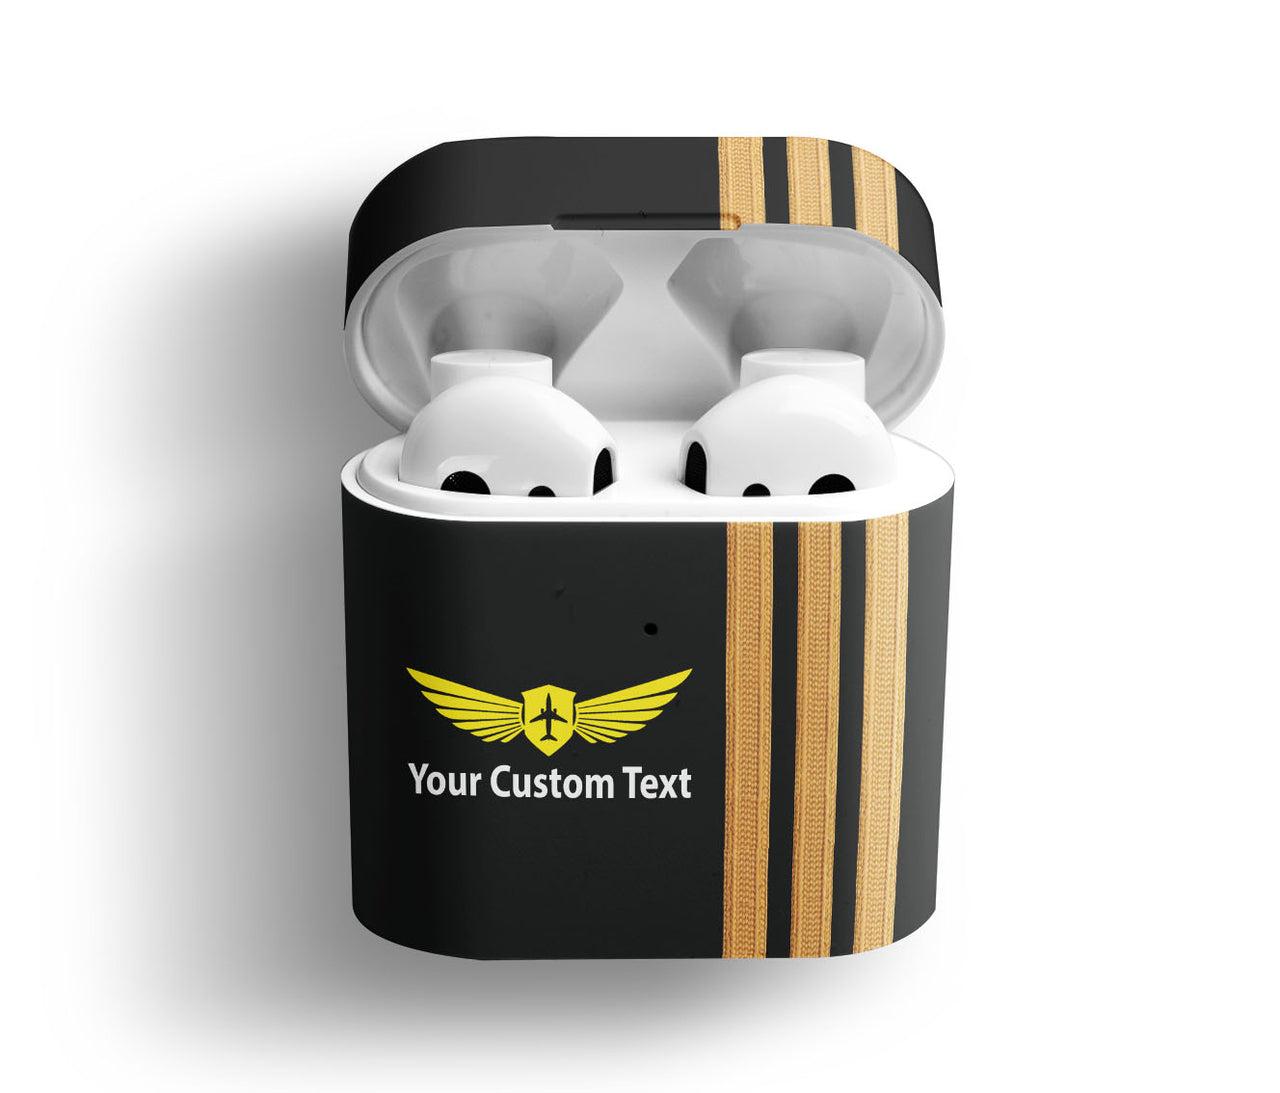 Customizable Name & Special Golden Pilot Epaulettes Designed AirPods Cases